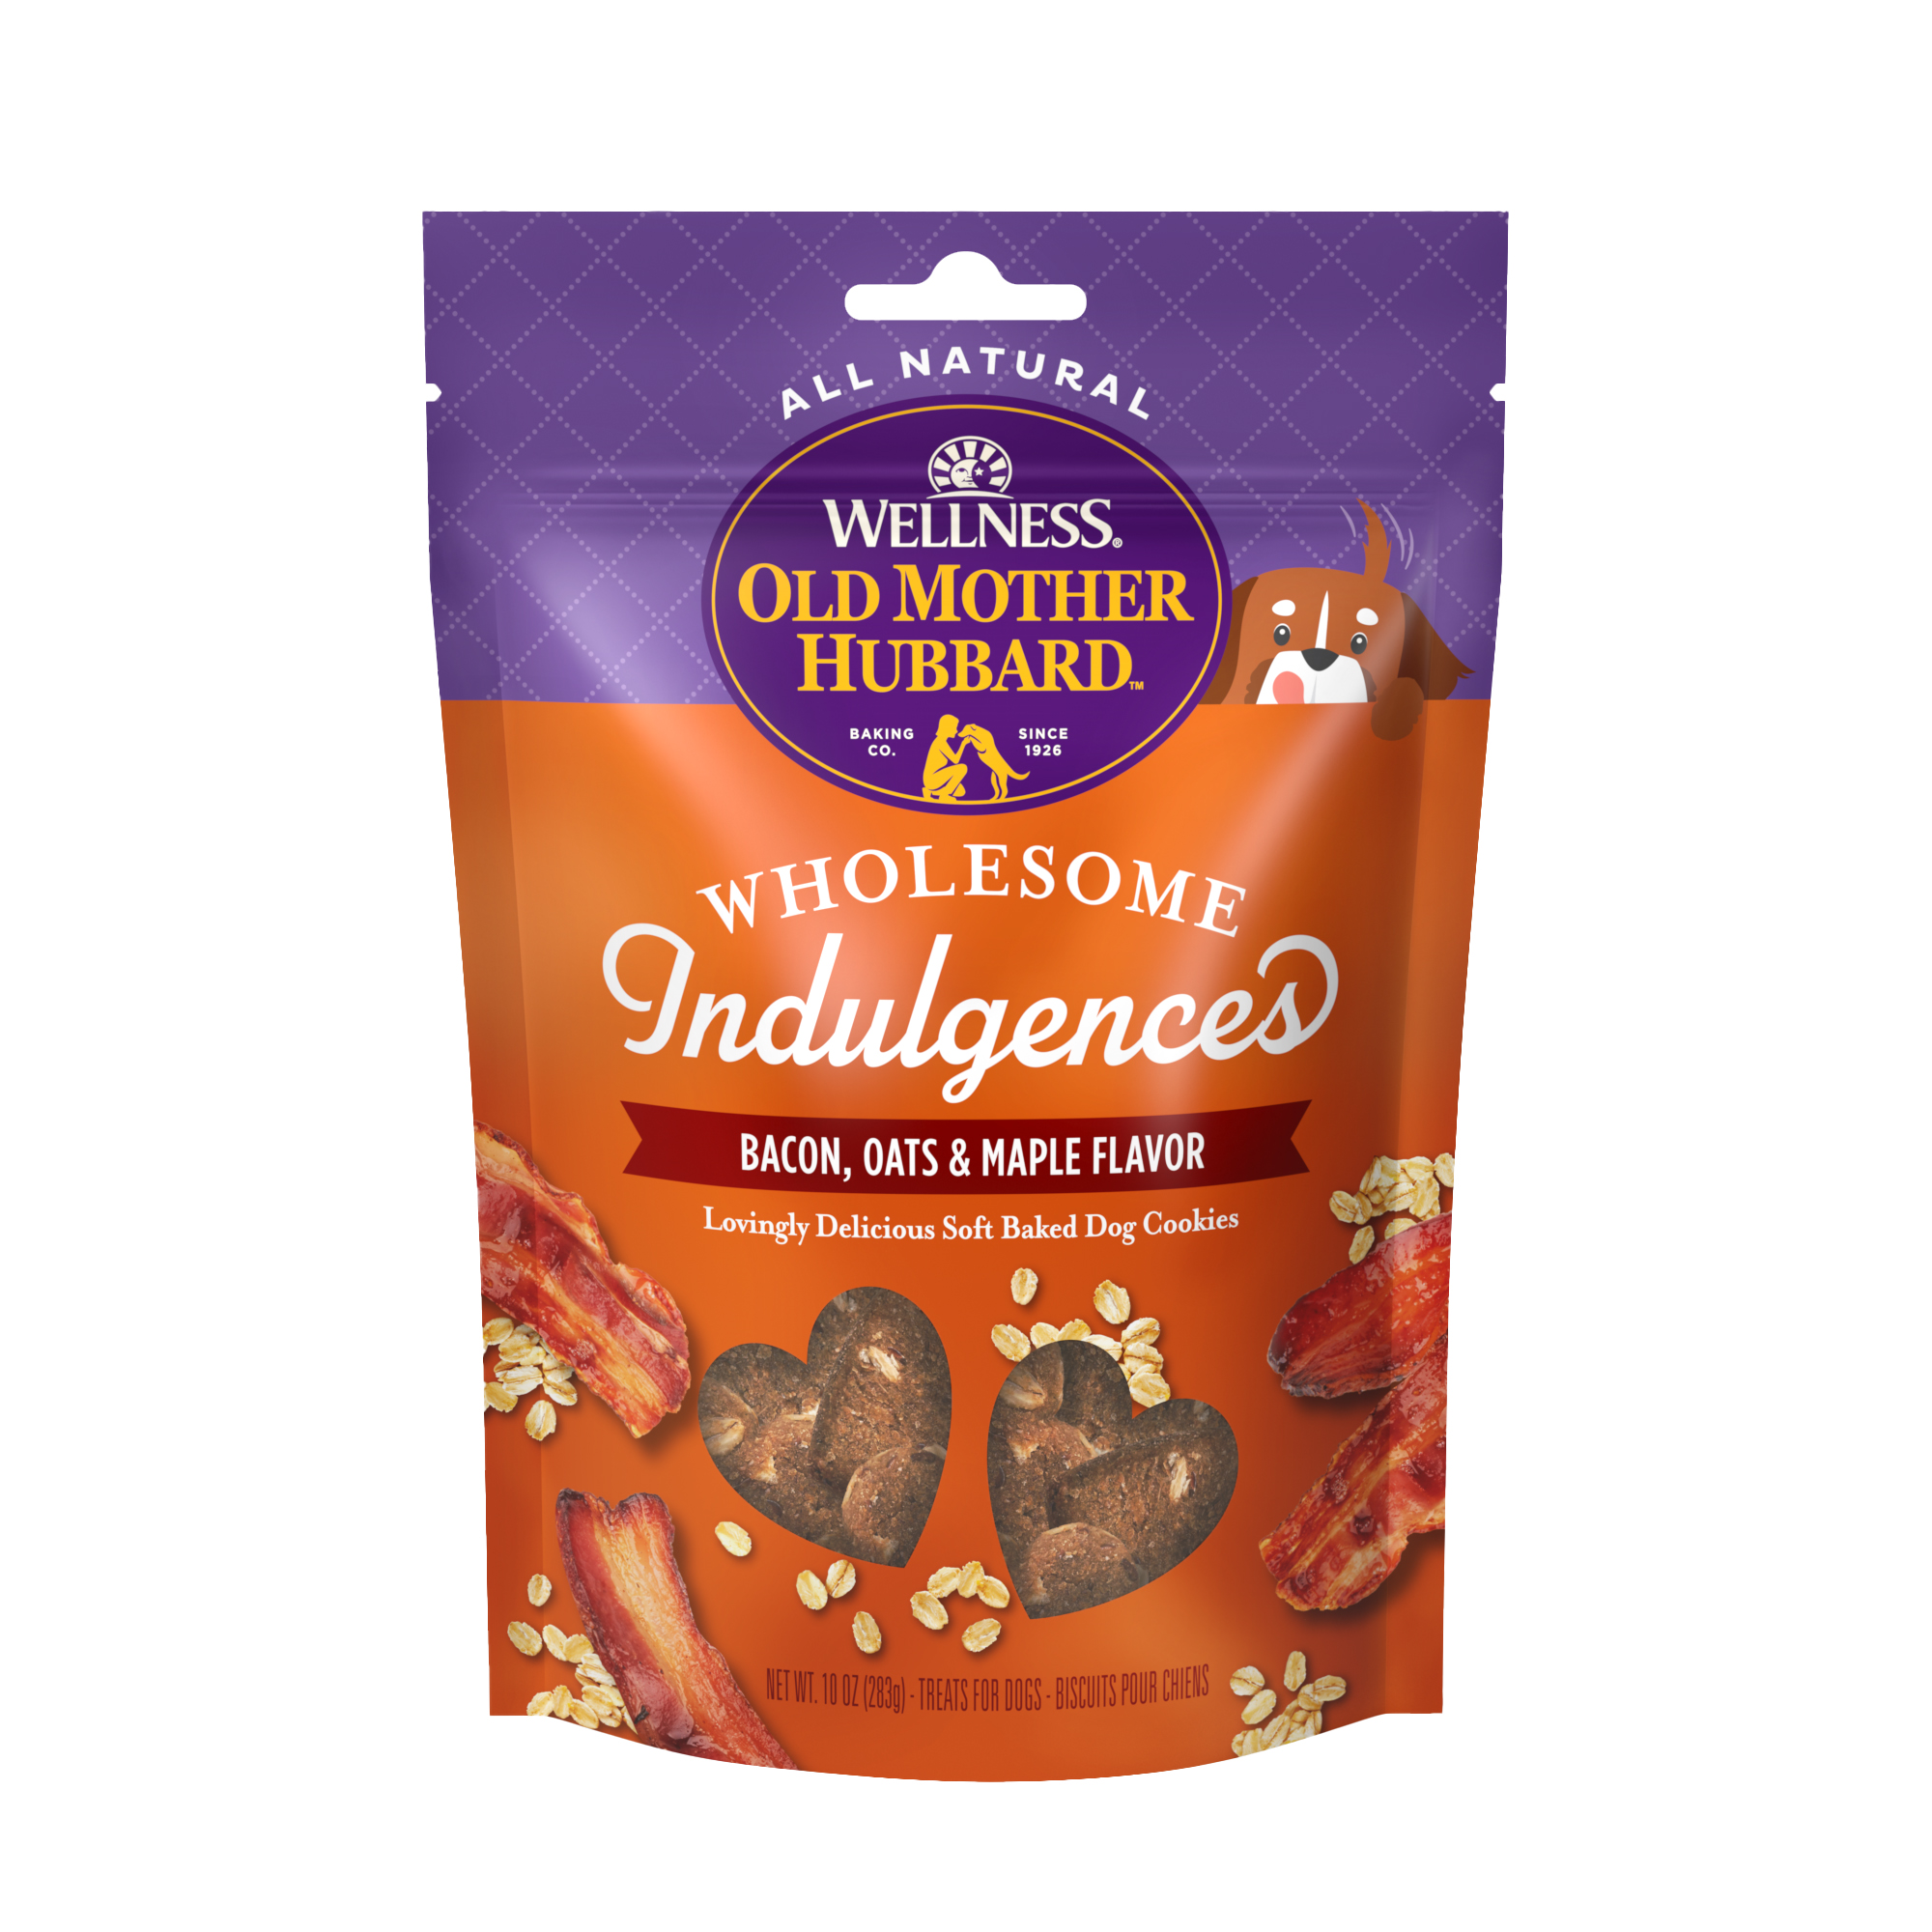 Old Mother Hubbard Wholesome Indulgences Bacon, Oats & Maple Flavor